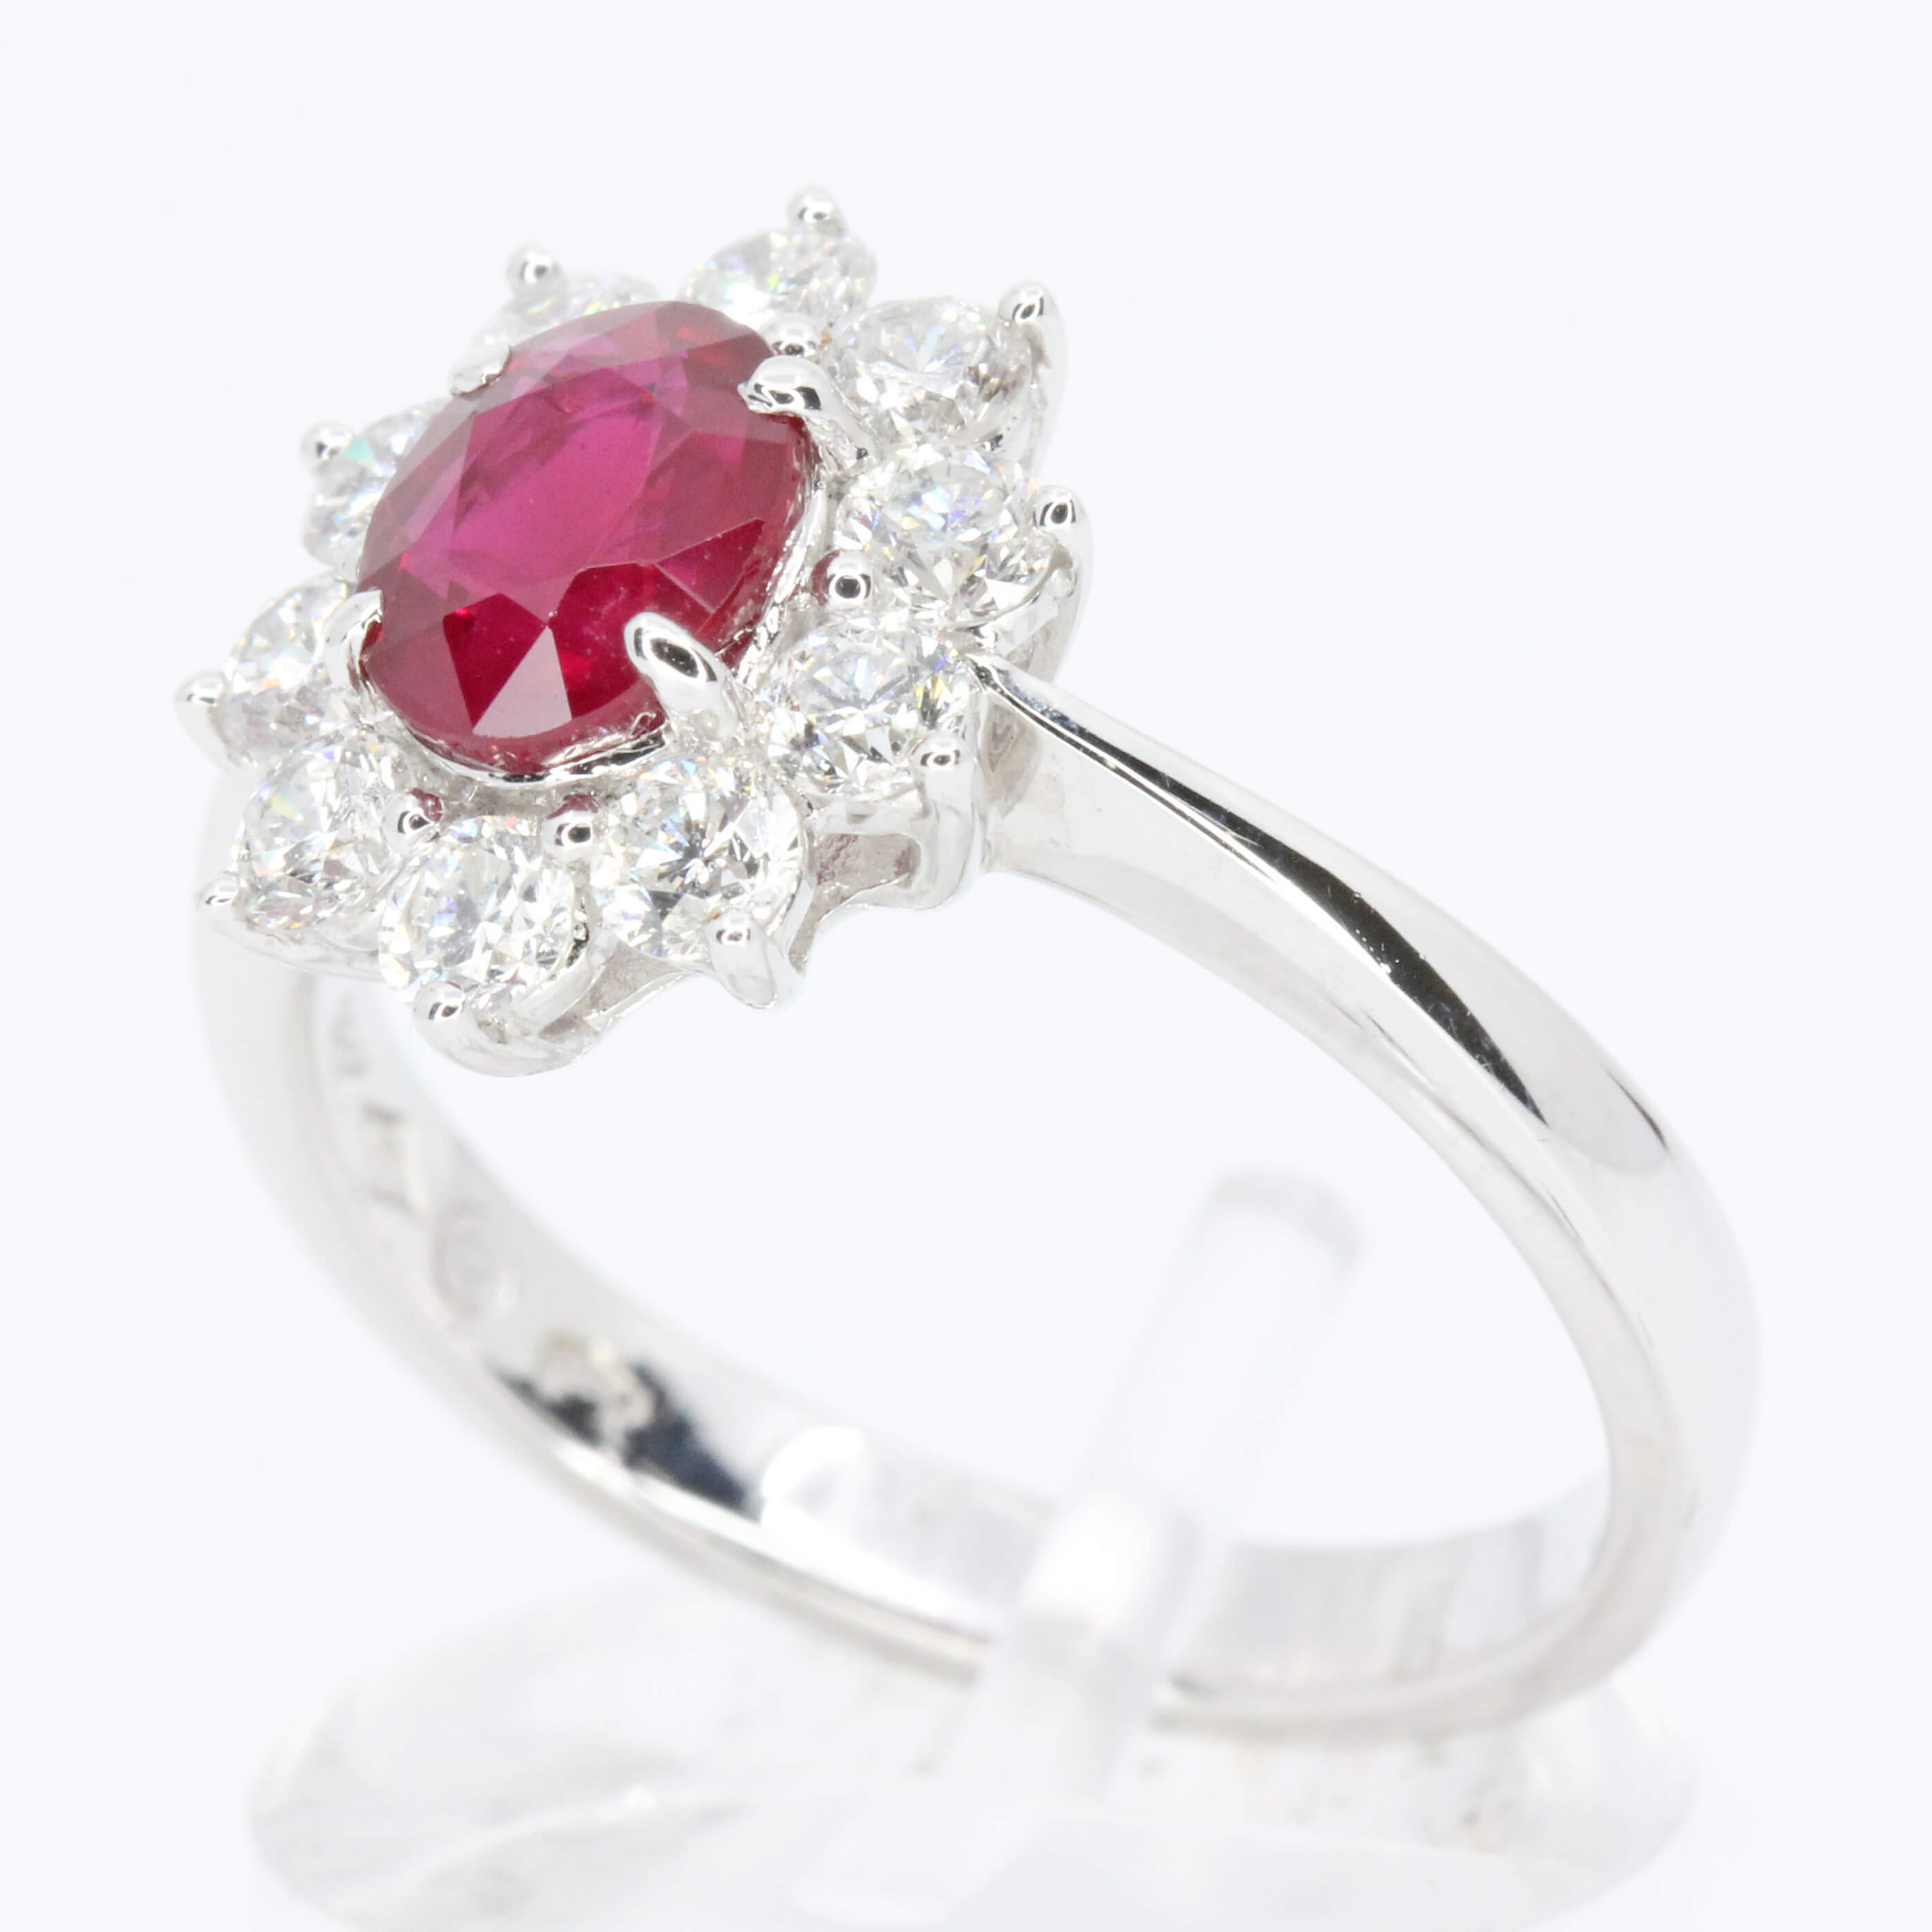 Oval Cut Ruby Ring with Diamond Halo Set in 18ct White Gold Size M